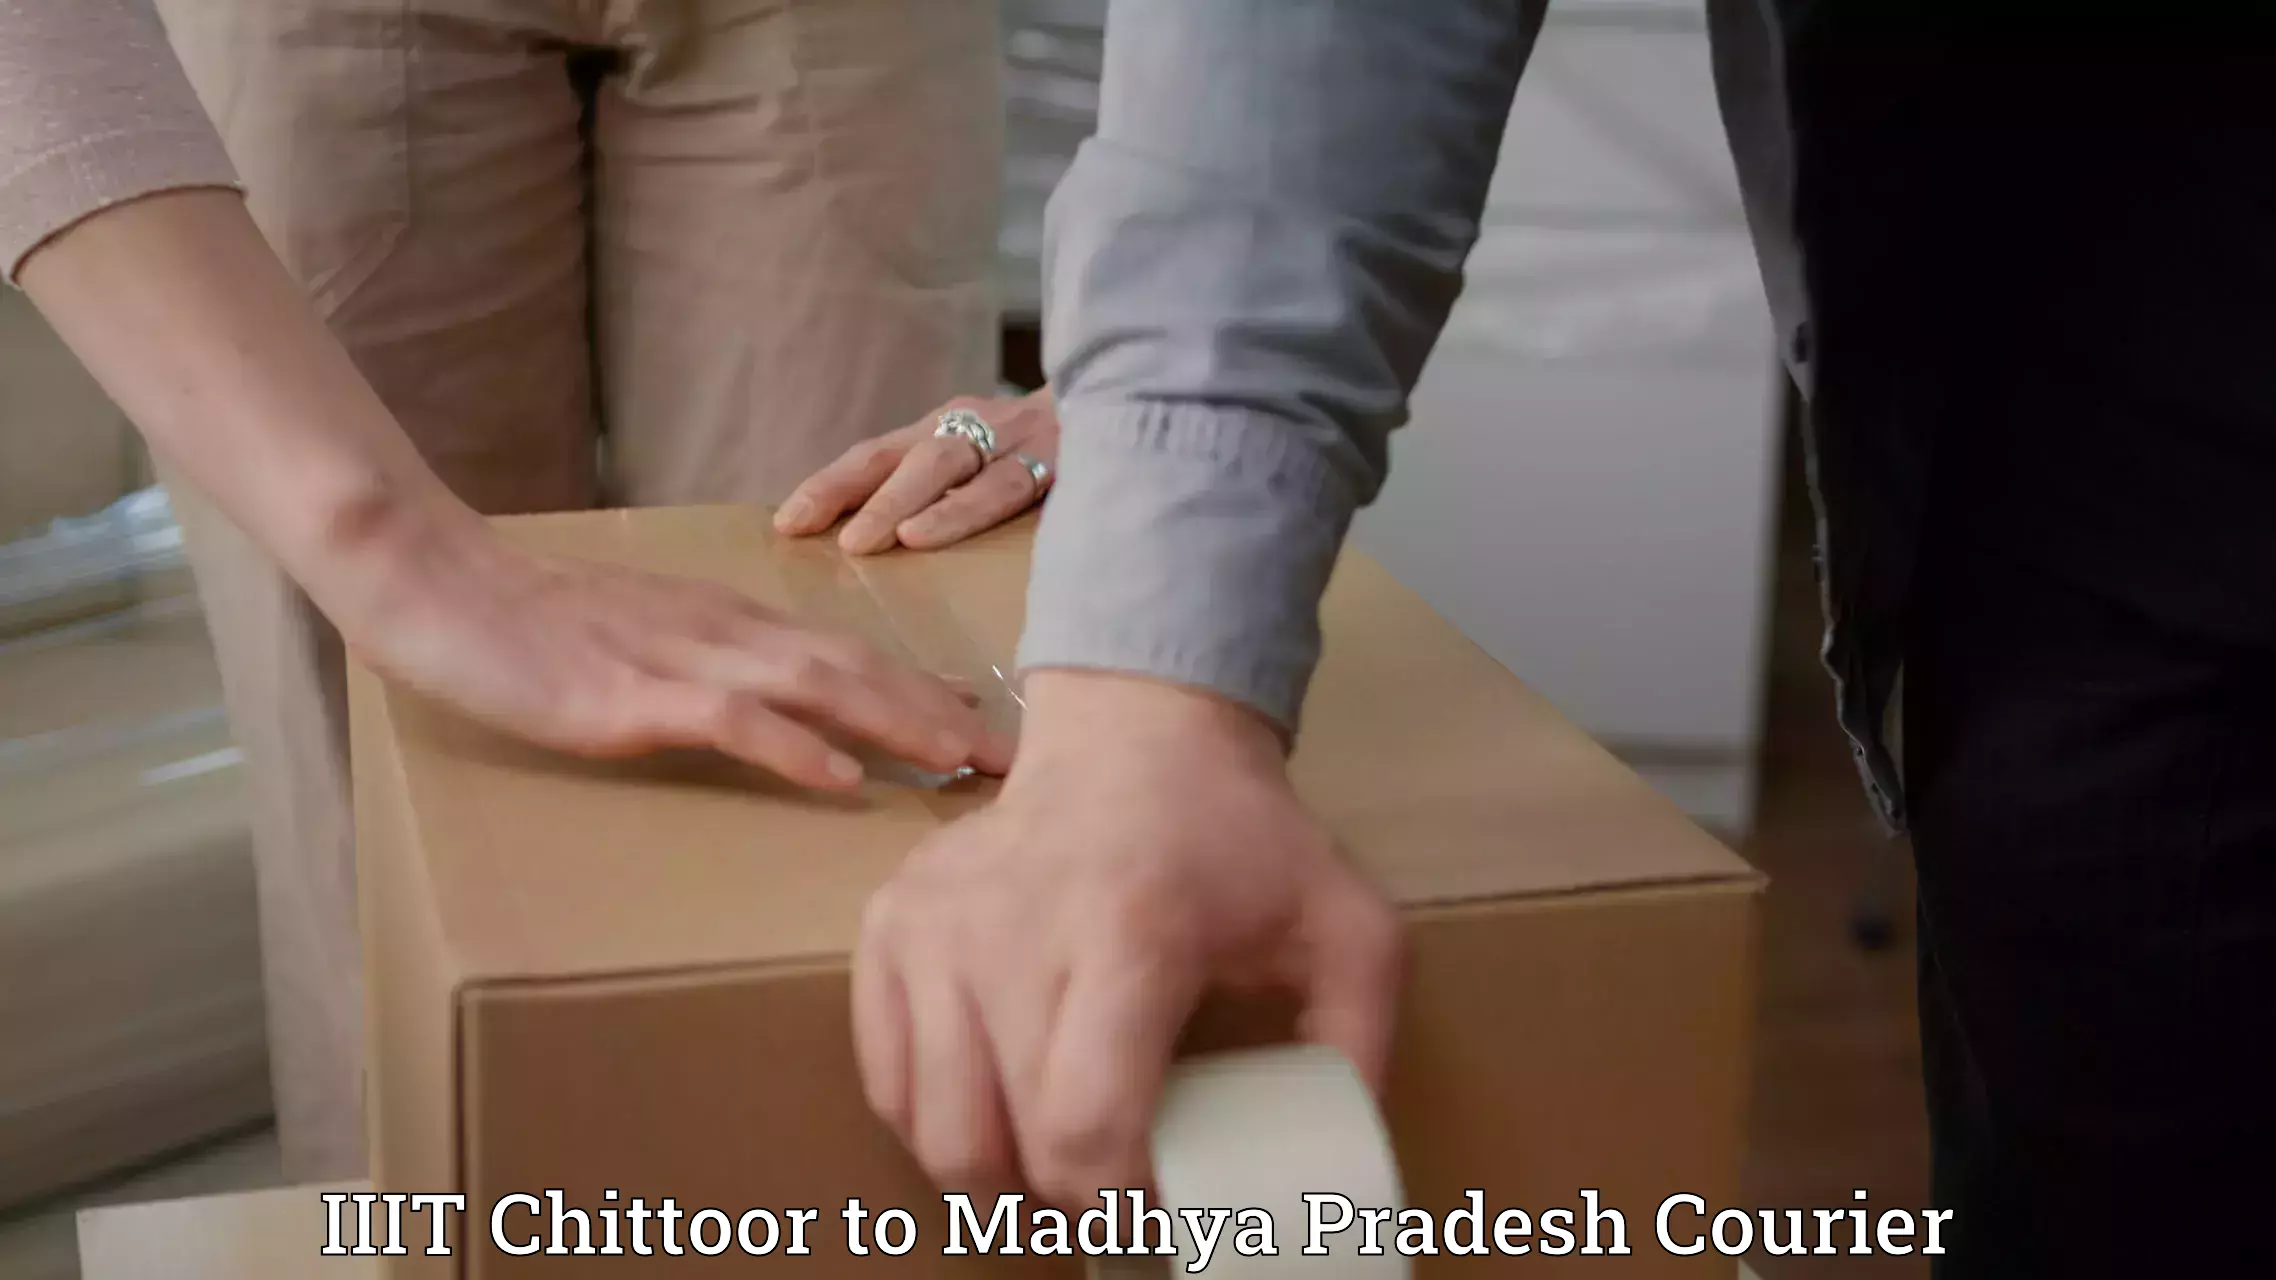 Easy access courier services IIIT Chittoor to Prithvipur